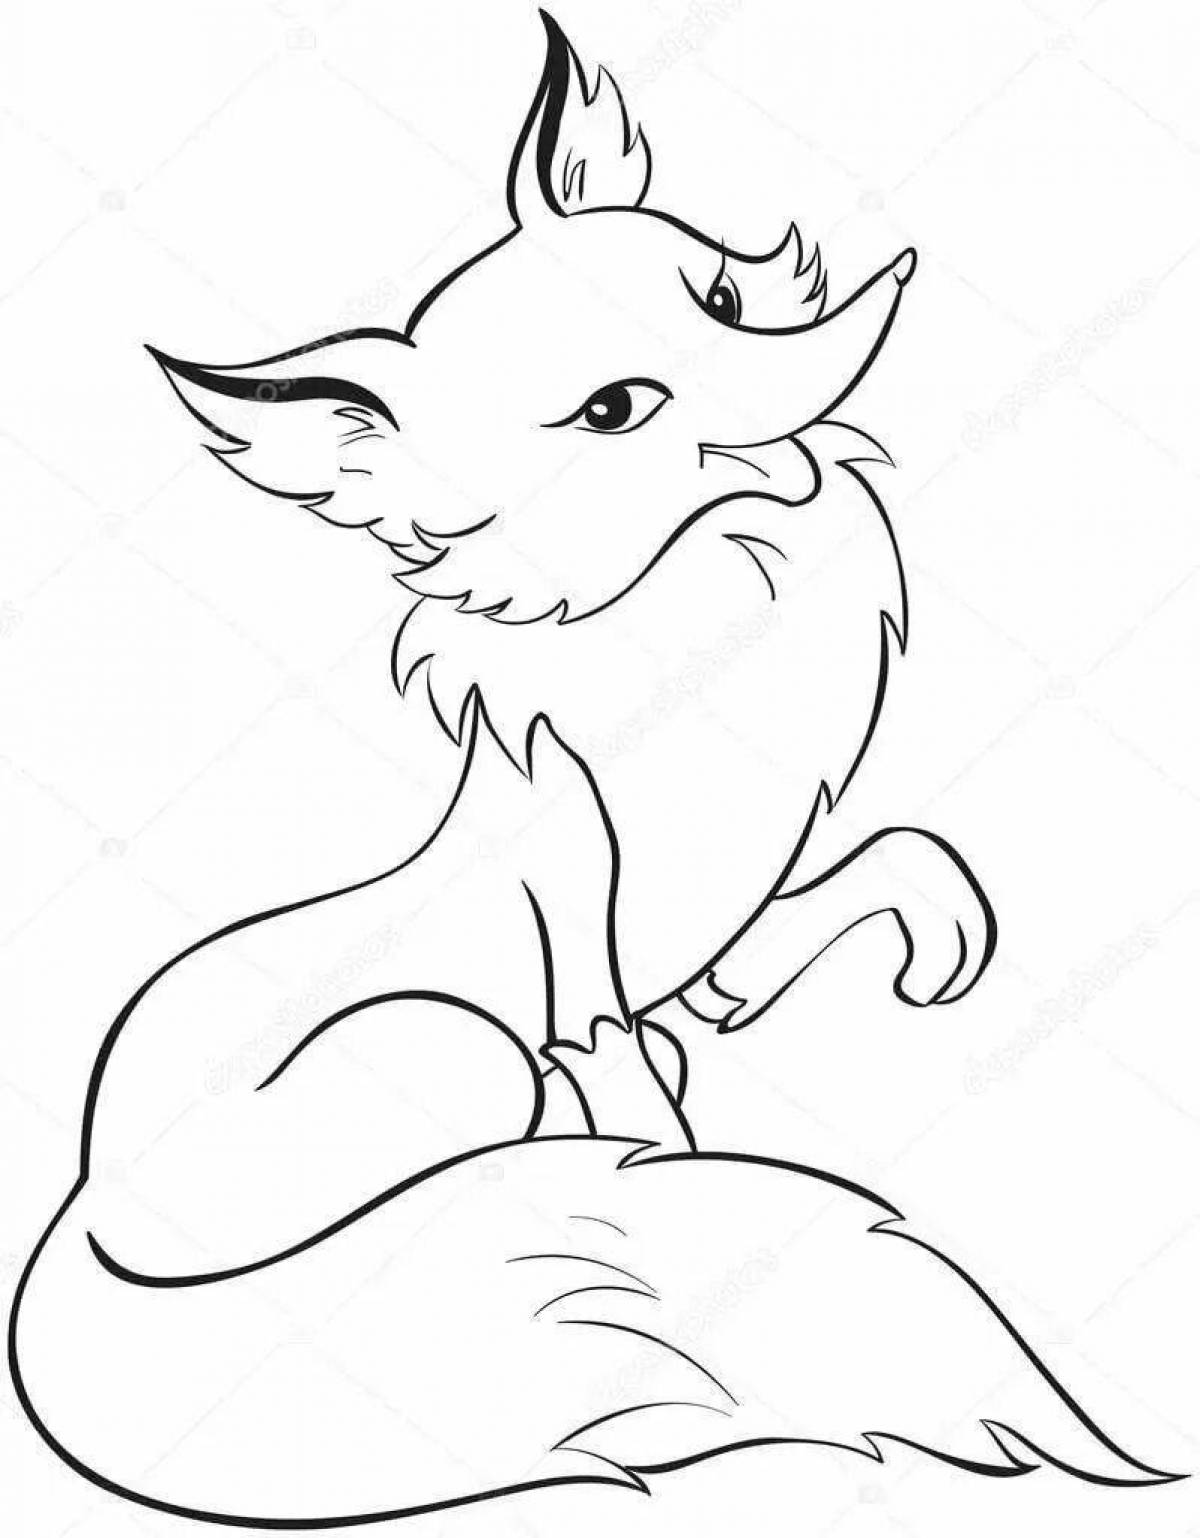 Coloring page mischievous sly fox